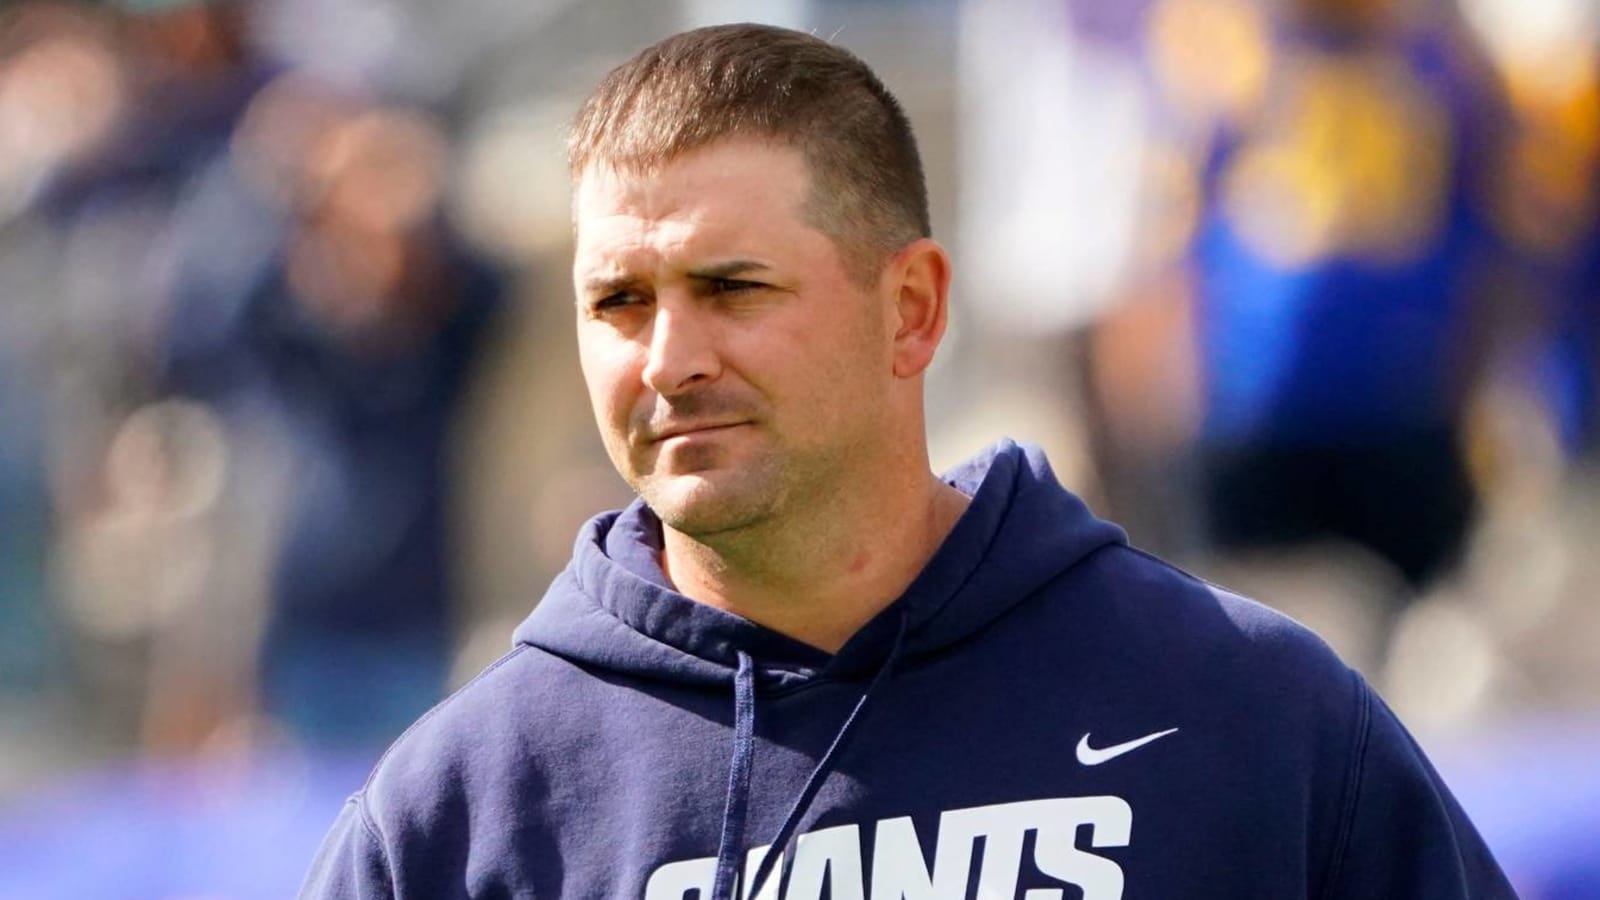 Giants HC Joe Judge: 'This is definitely going to get better'